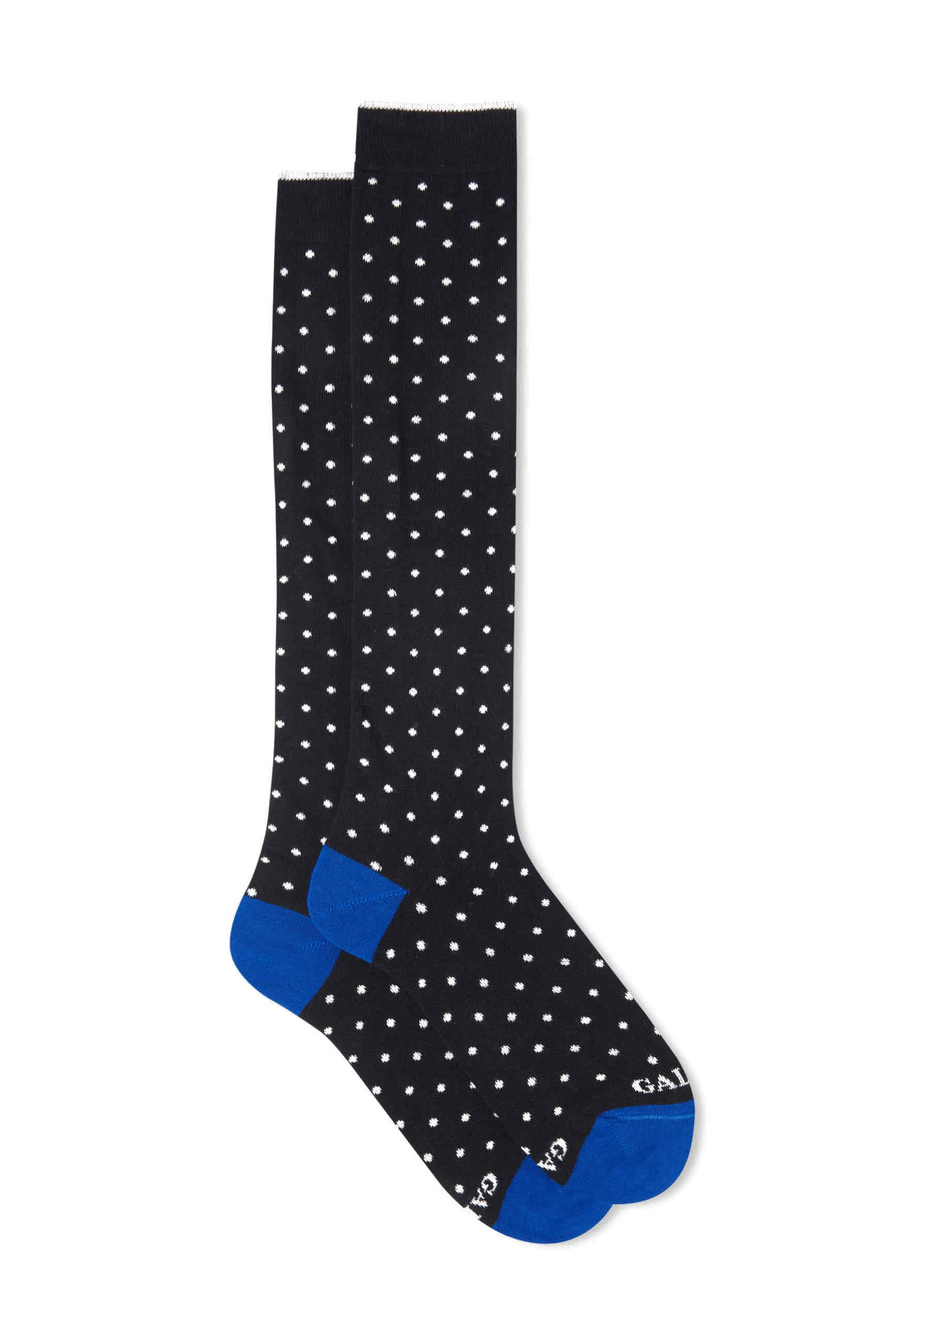 Women's long black cotton socks with polka dots - Gallo 1927 - Official Online Shop